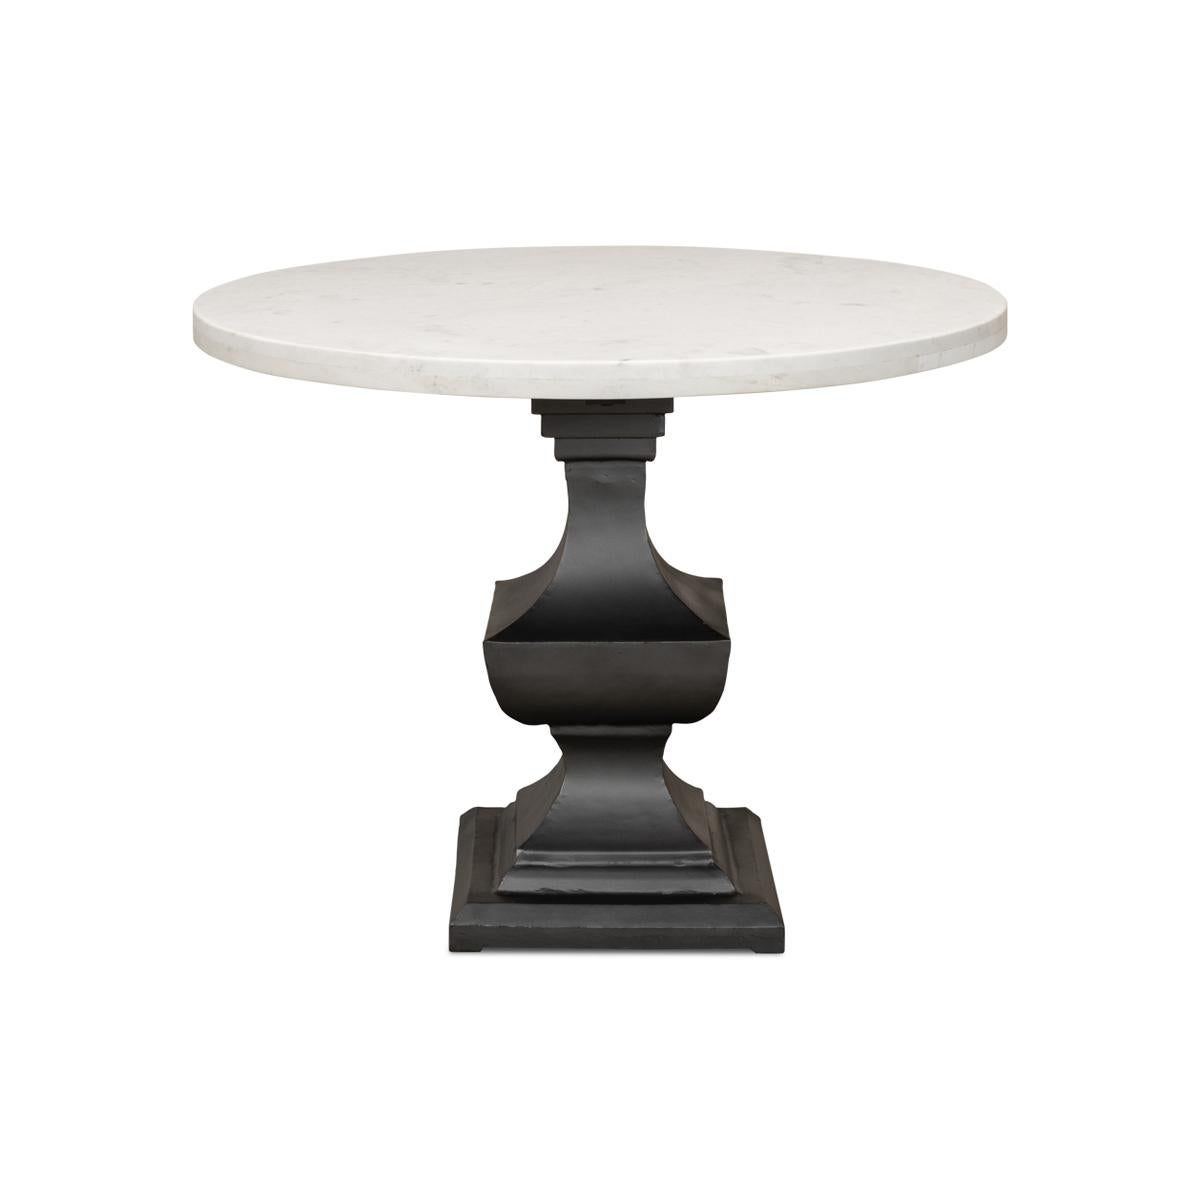 Marble top dining table, a wonderful piece that is sure to elevate any dining room. This table boasts a smooth and gleaming 40-inch round white marble top that sits atop a metal pedestal base. The base is finished in a chic gunmetal color and is